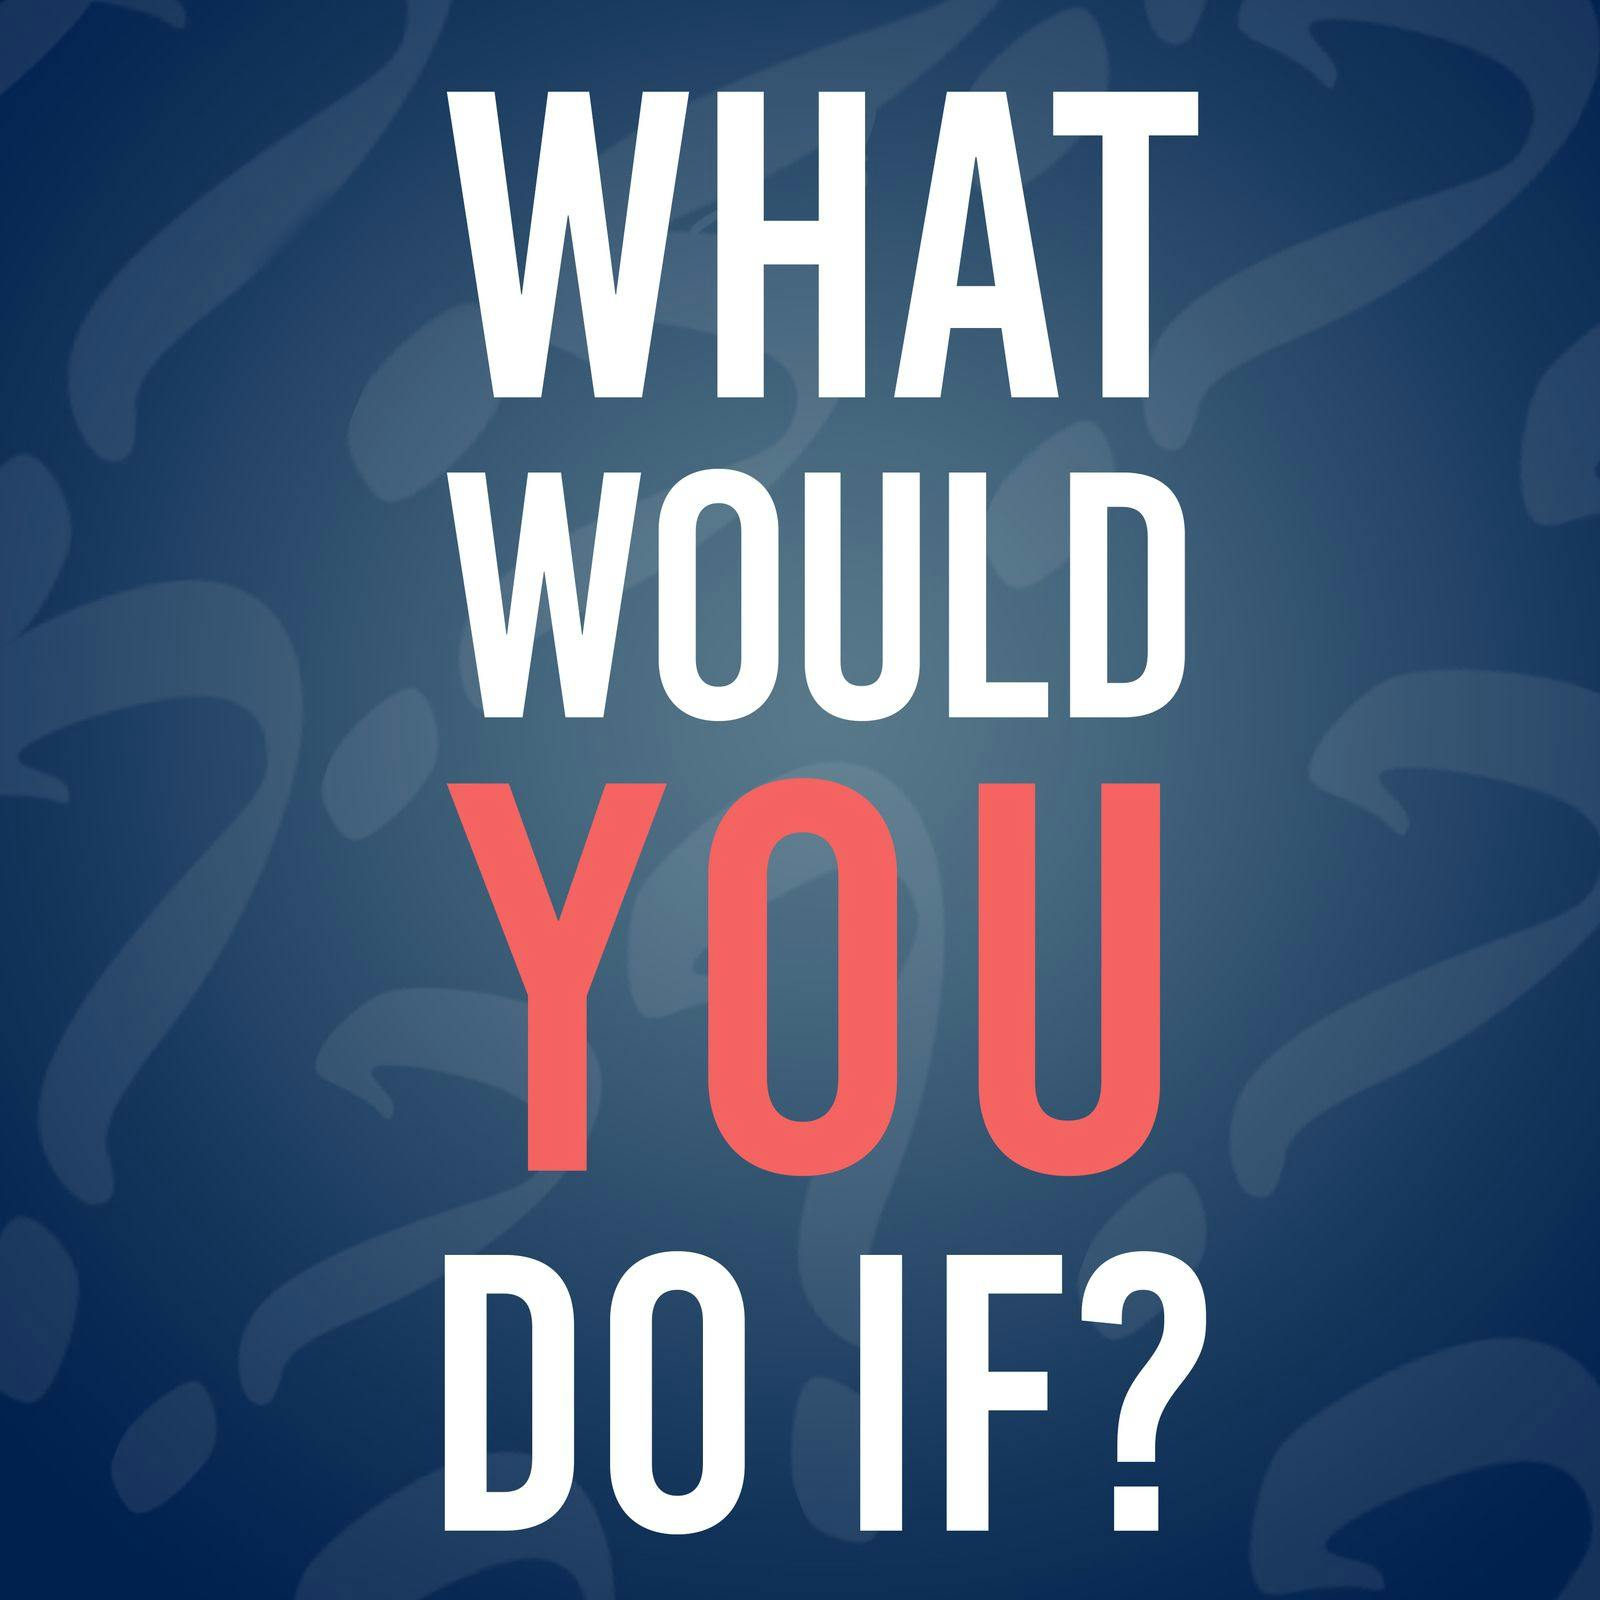 S1: What Would You Do If We Launched A Podcast Soon?